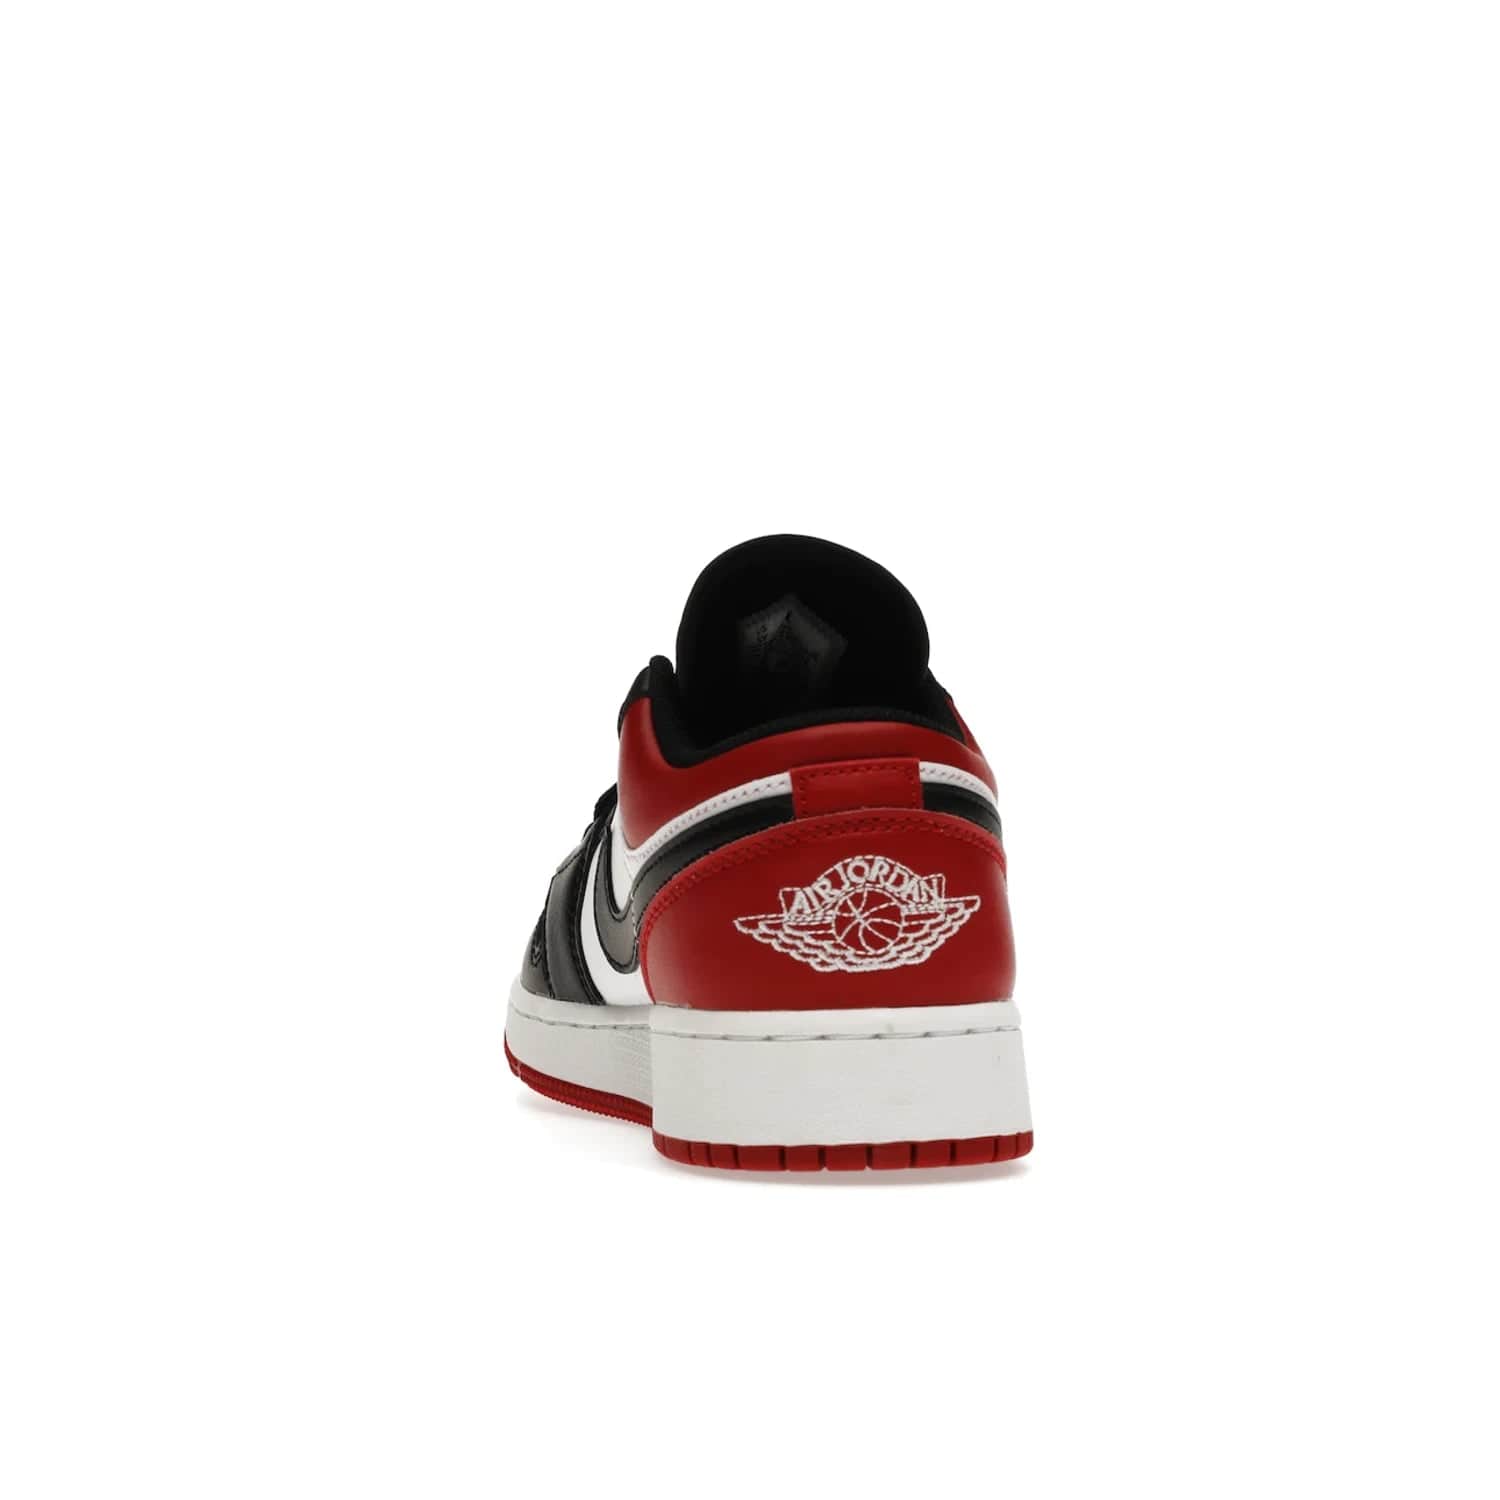 Jordan 1 Low Bred Toe (GS) - Image 27 - Only at www.BallersClubKickz.com - #
Iconic sneaker from Jordan brand with classic colorway, unique detailing & Air Jordan Wings logo. Step into the shoes of the greats with the Jordan 1 Low Bred Toe GS!